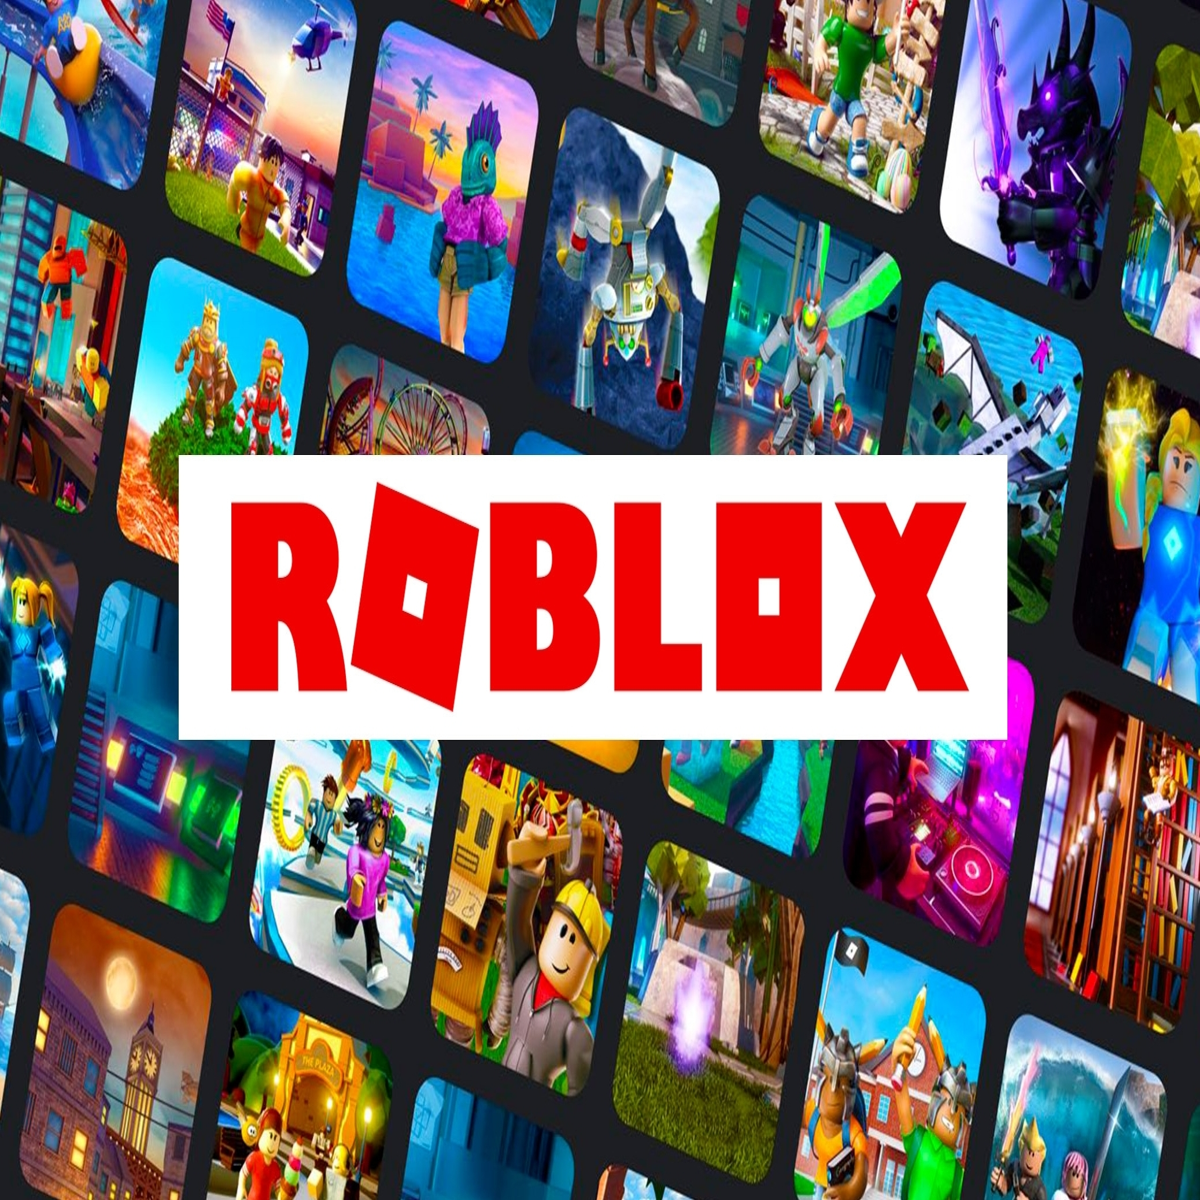 Roblox sues banned 'cybermob' leader for terrorizing the platform - Polygon